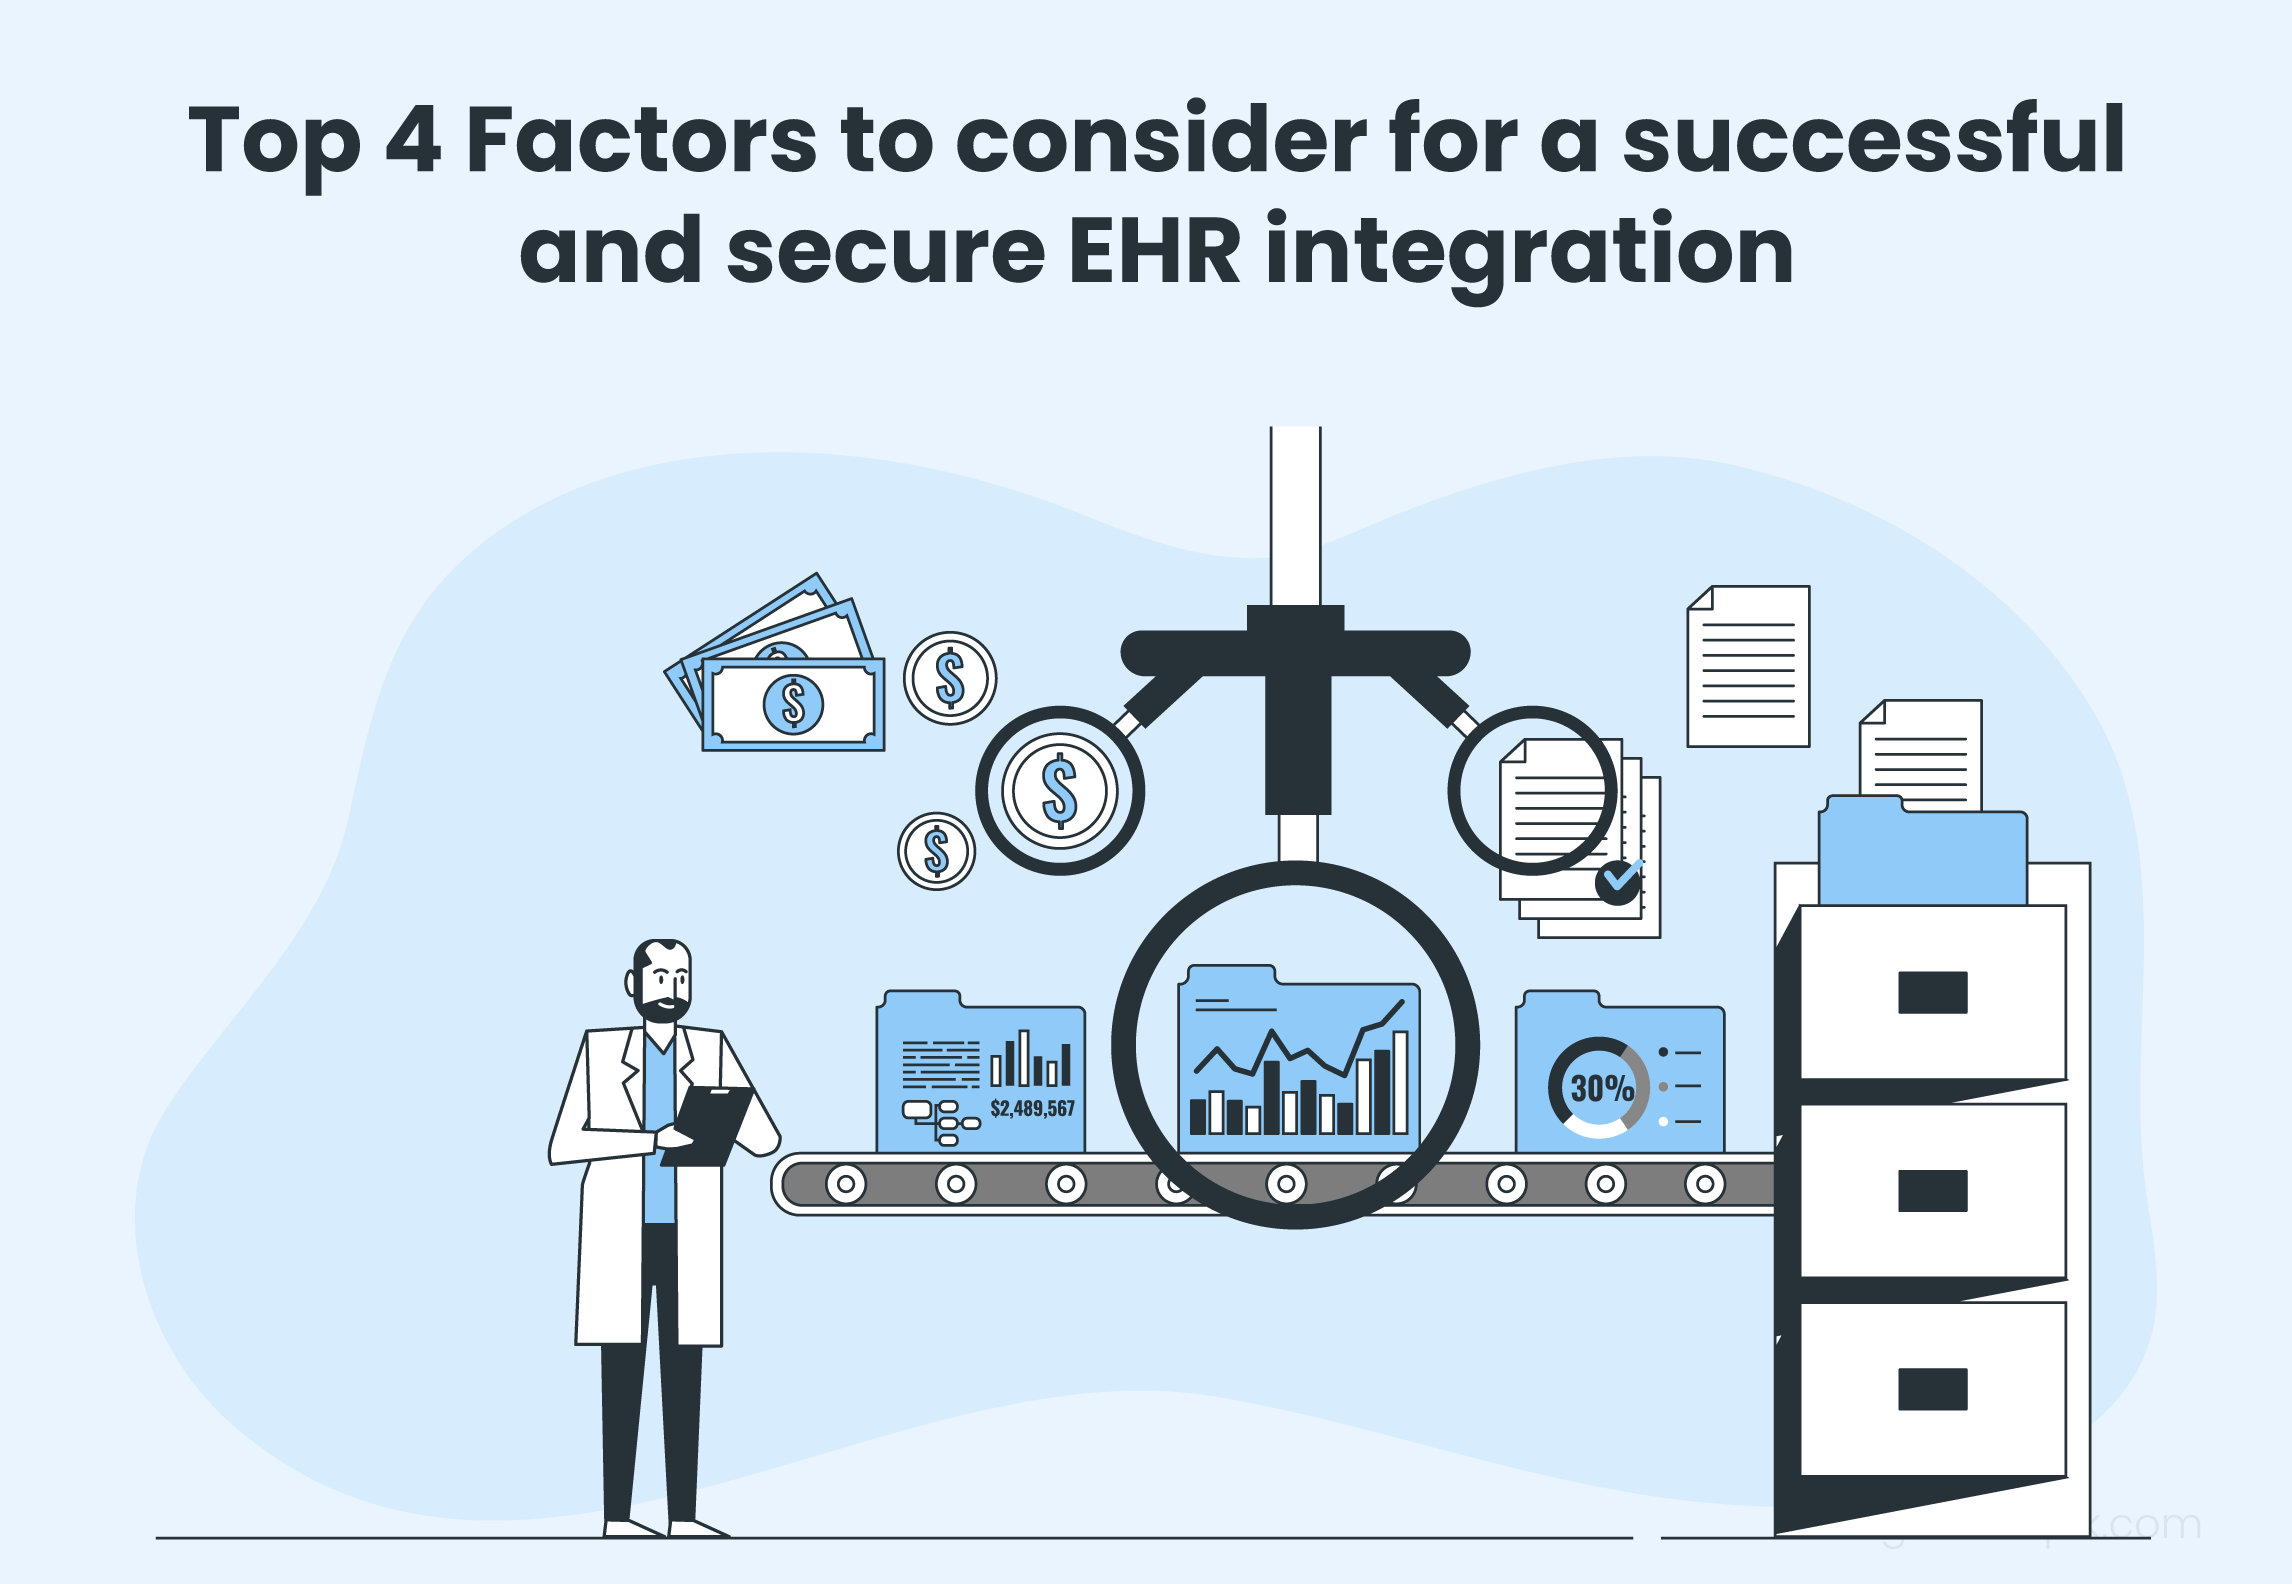 Top 4 Factors to consider for a successful and secure EHR integration